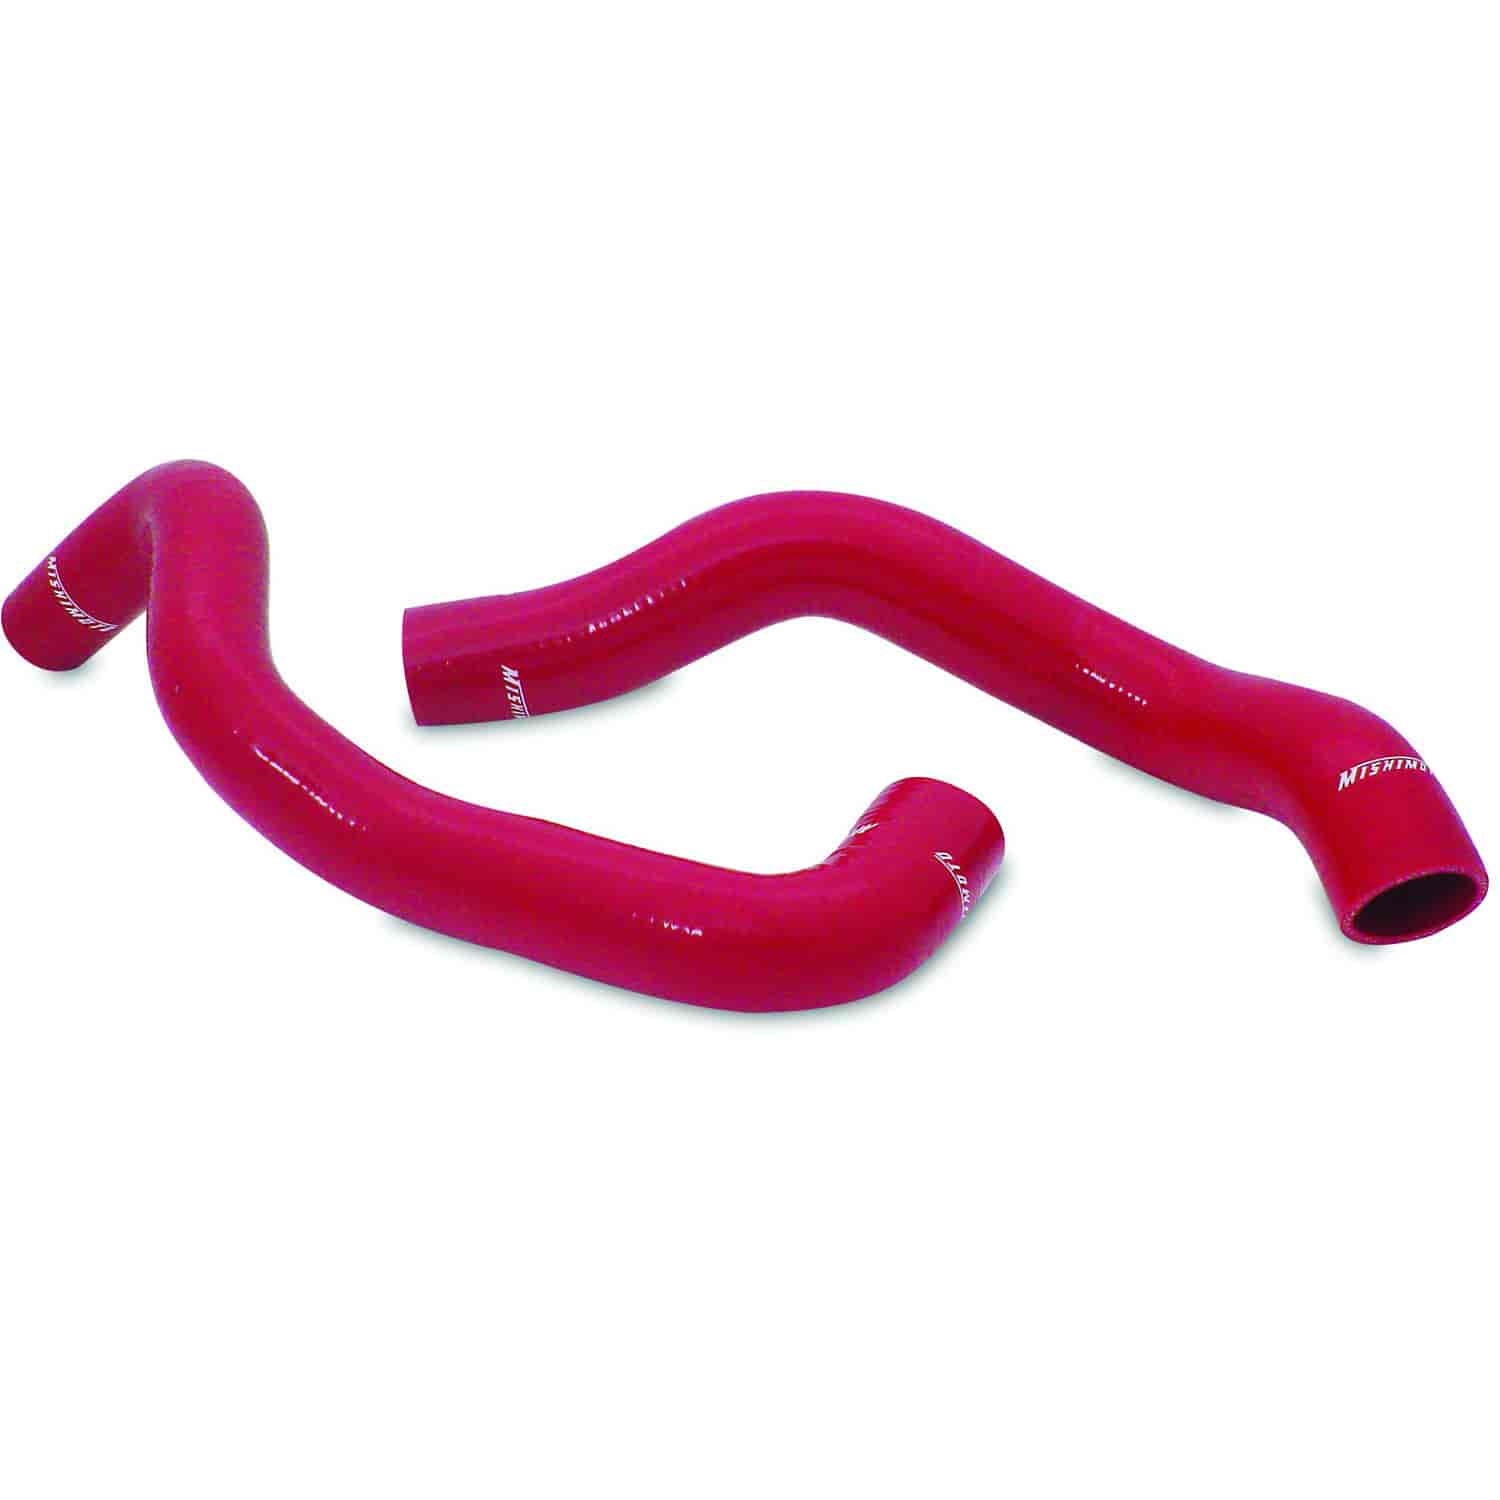 Silicone Coolant Hose Kit 1994-1995 Mustang GT/Cobra